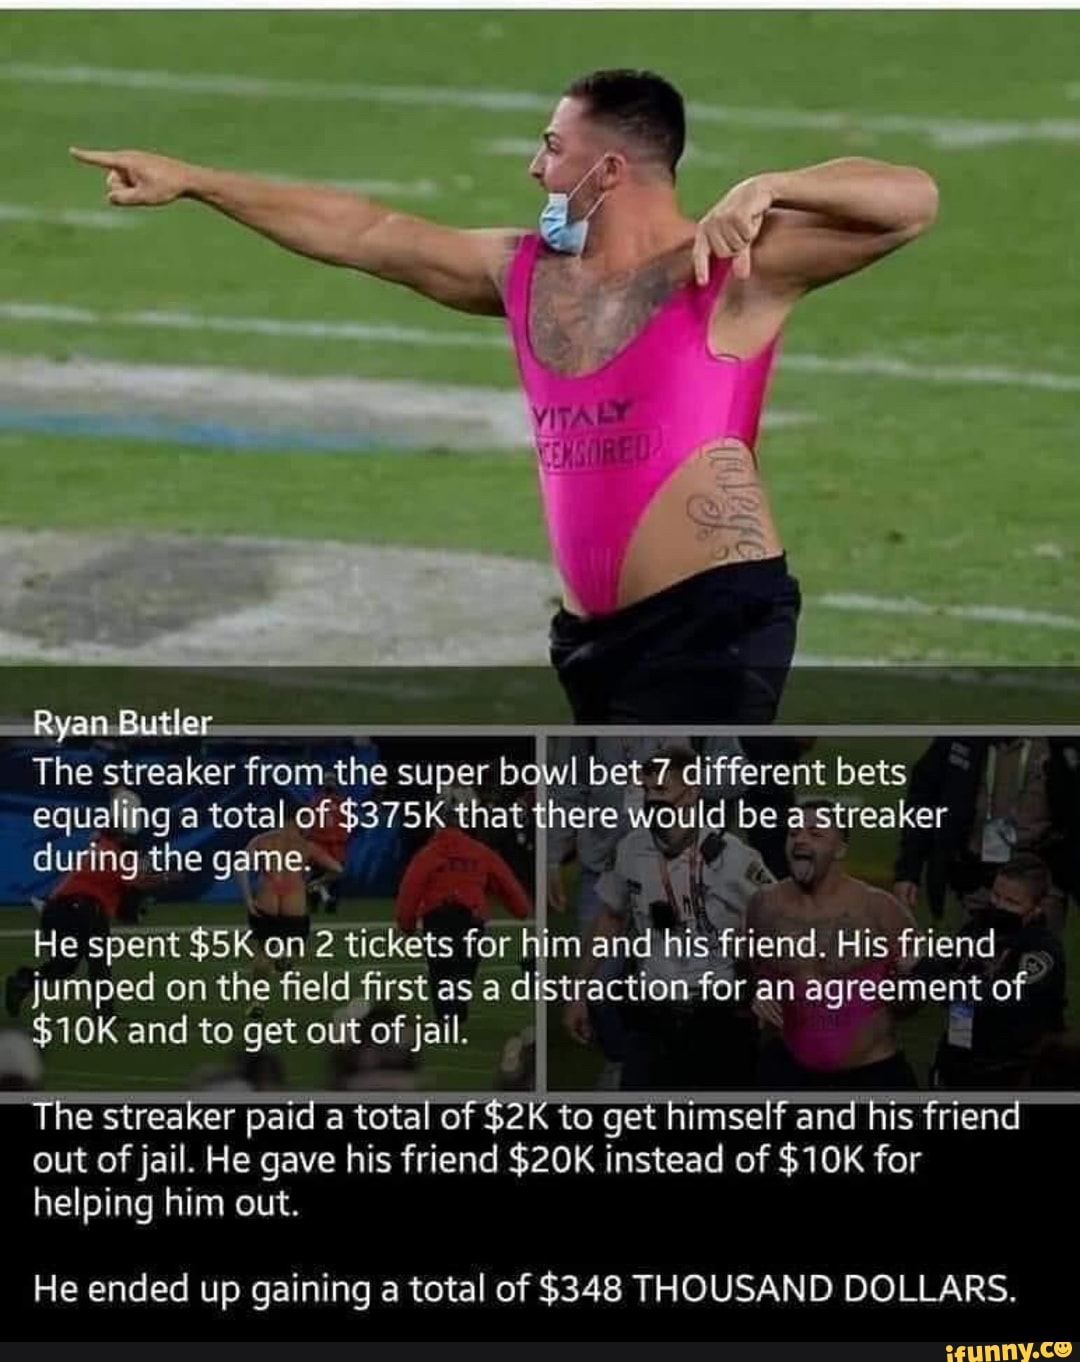 _ _Ryan Butler- The streaker from the super bowl bet different bets